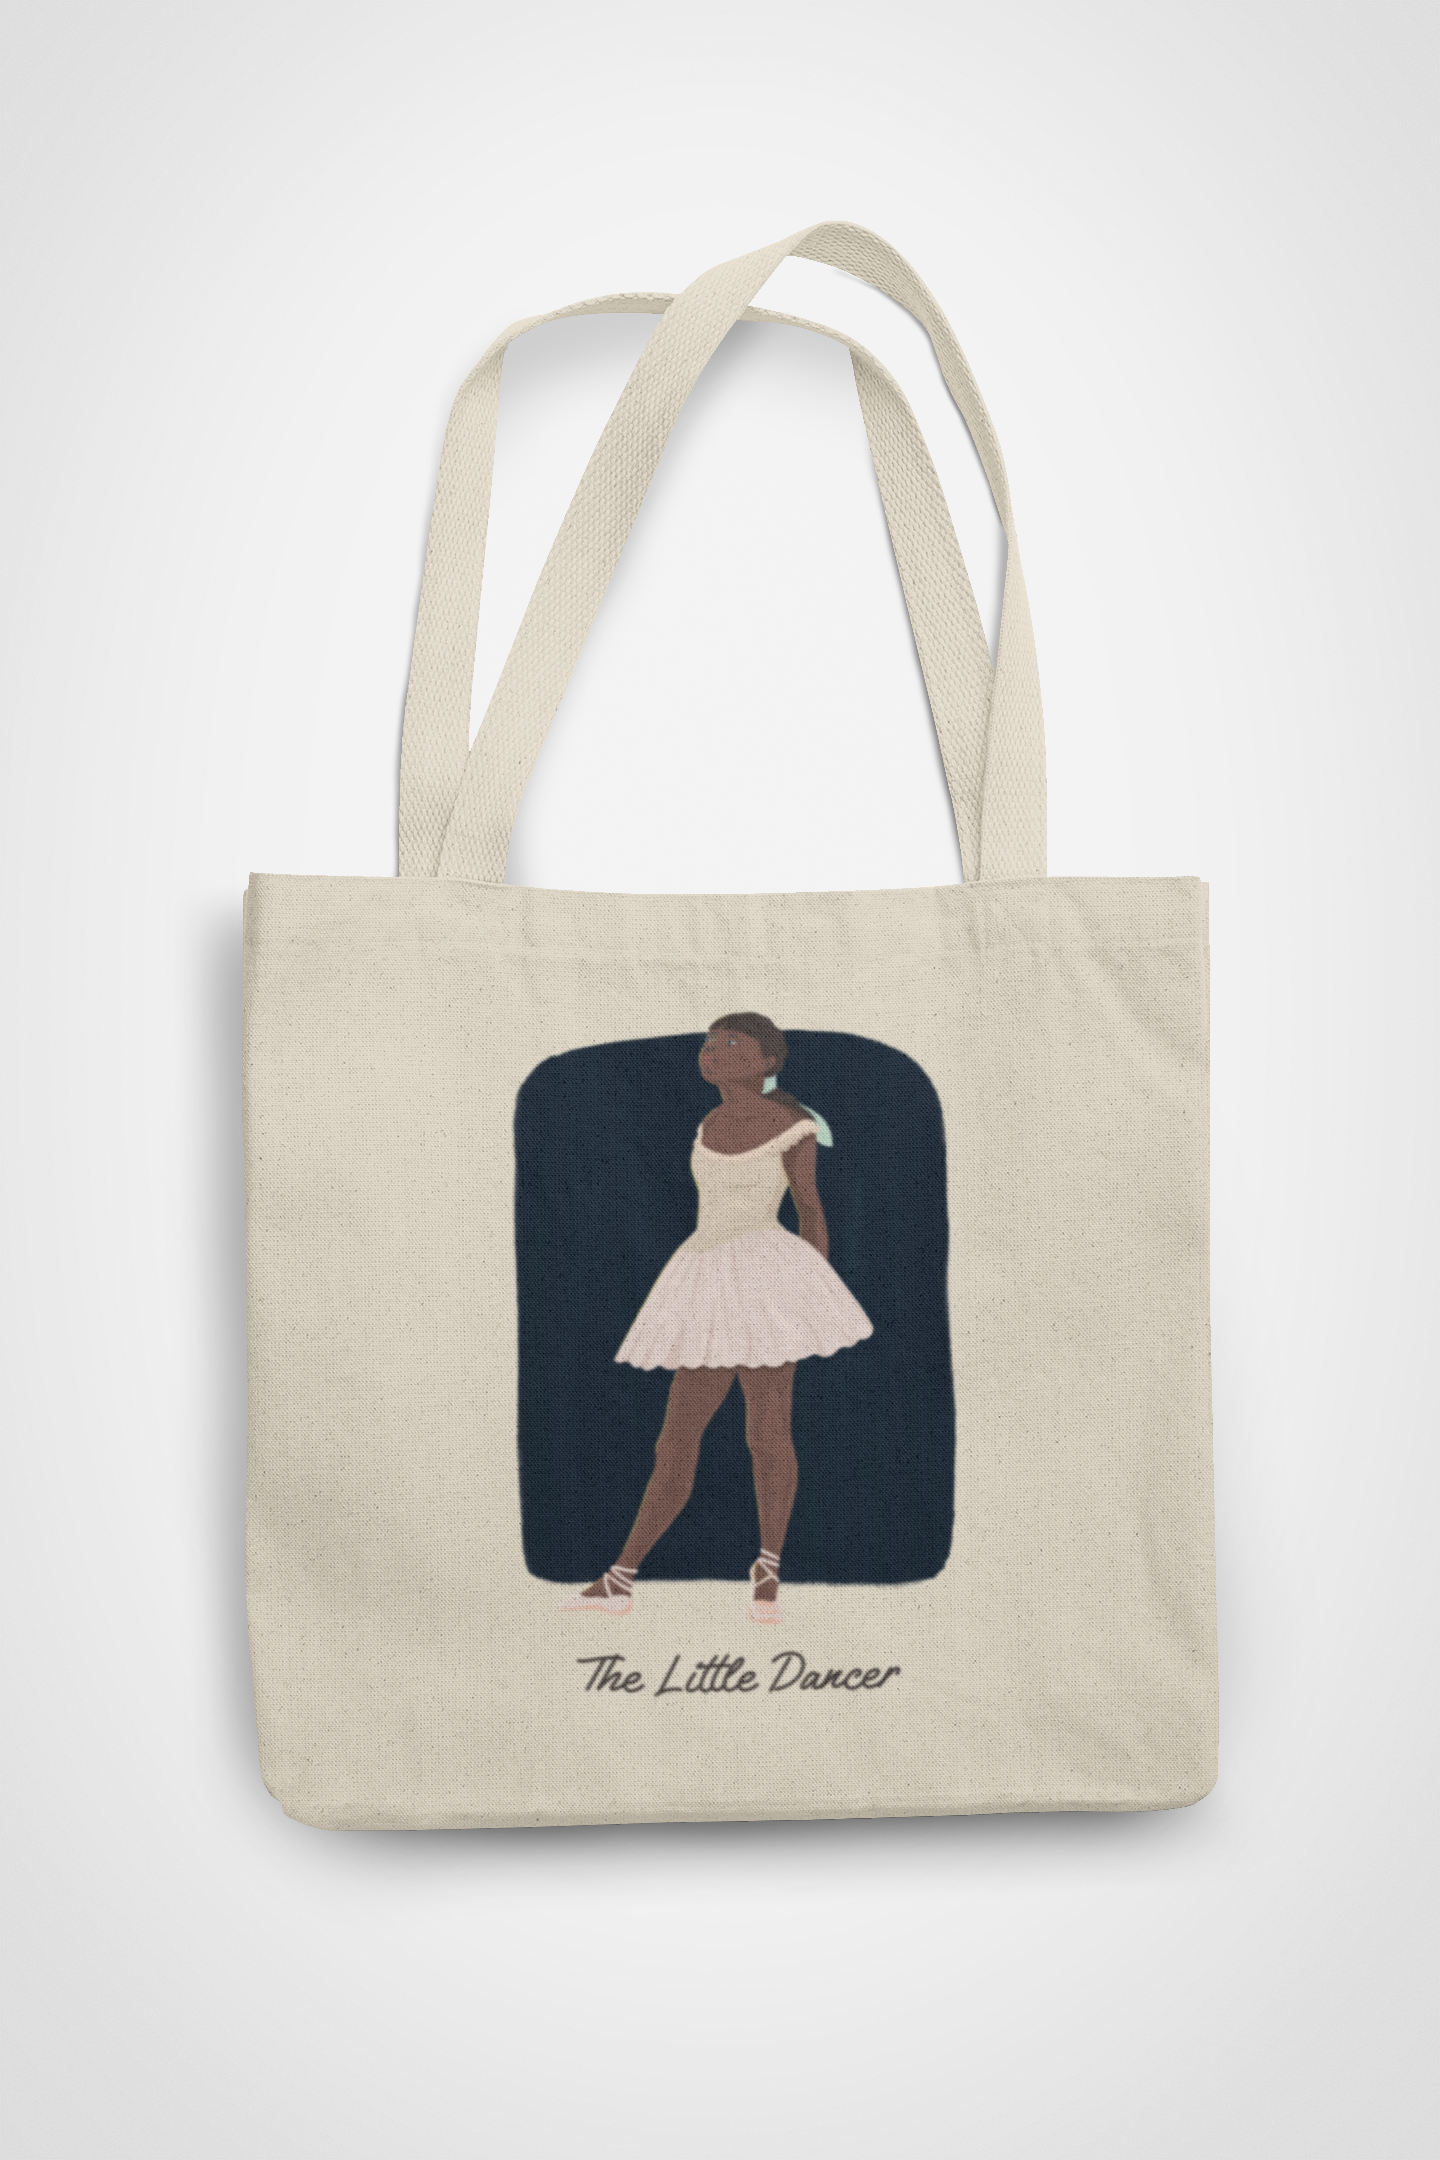 Zipped Tote Bag - The Little Dancer